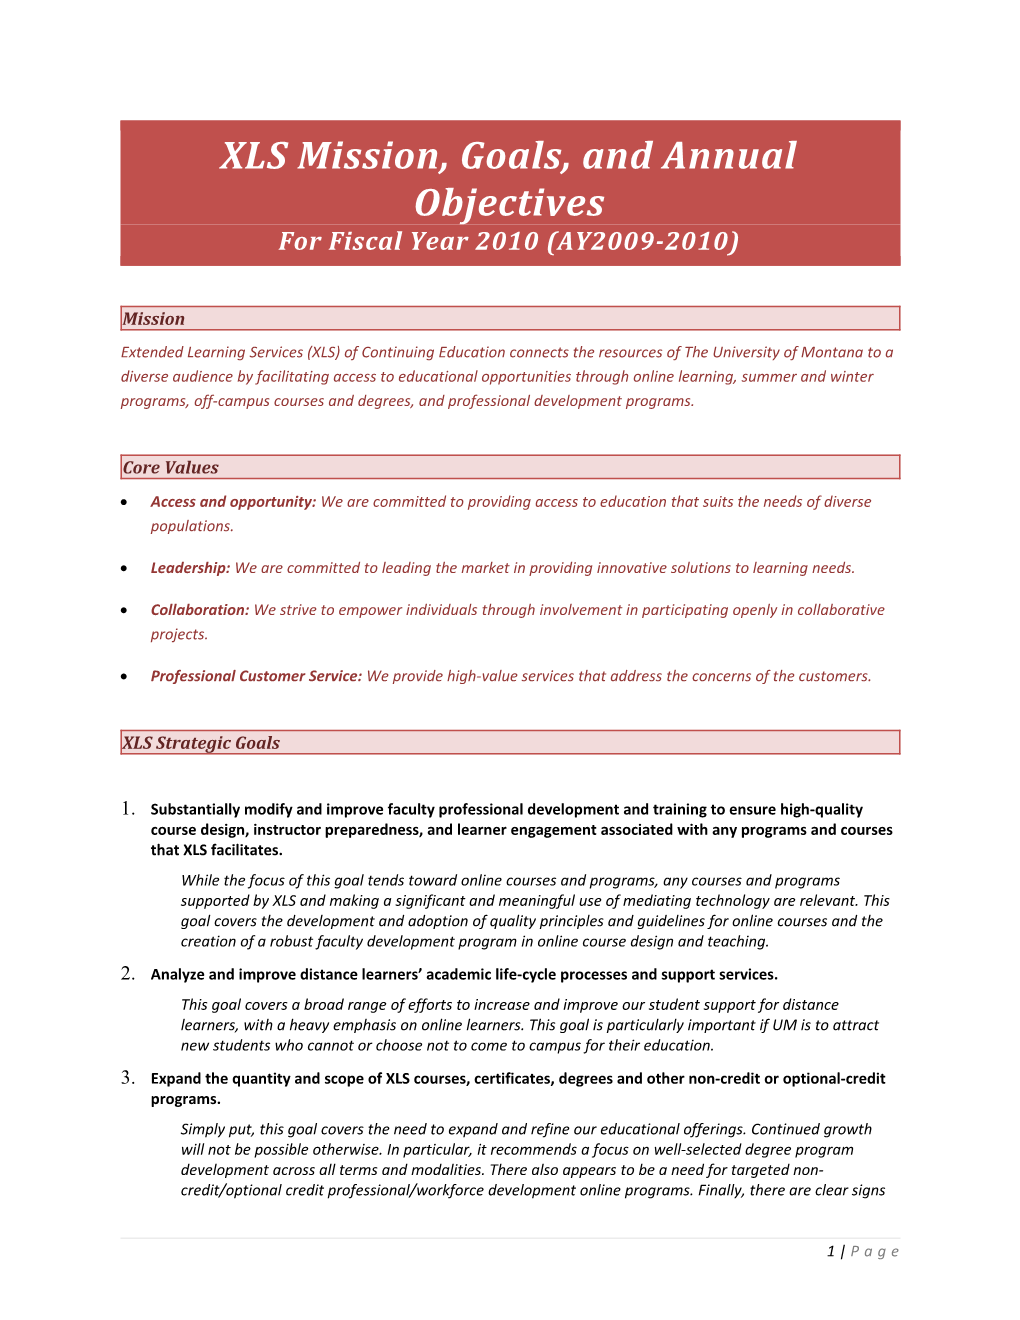 XLS Mission, Goals, and Annual Objectives